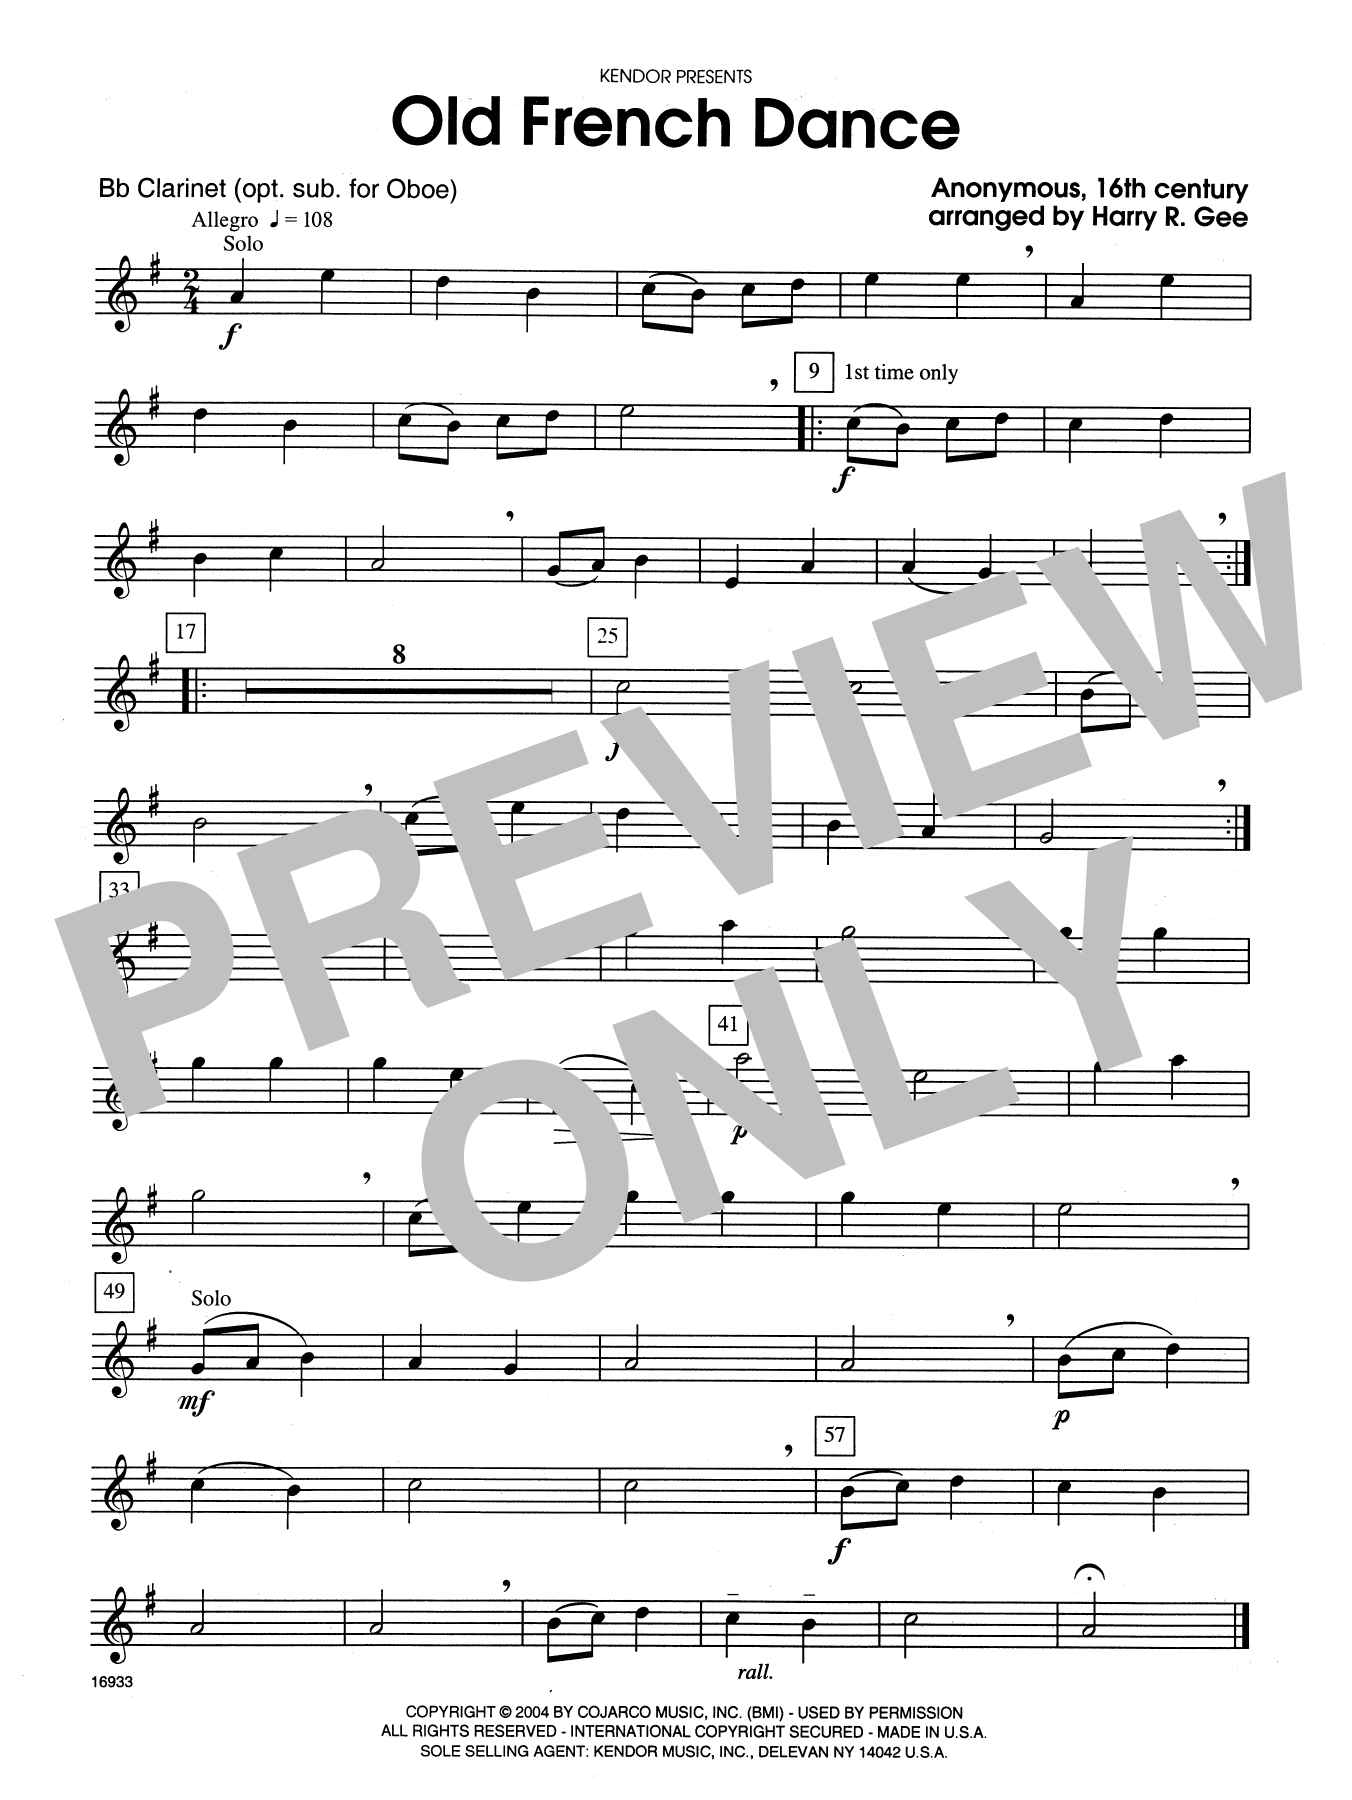 Download Harry R. Gee Old French Dance - Alternate Bb Clarine Sheet Music